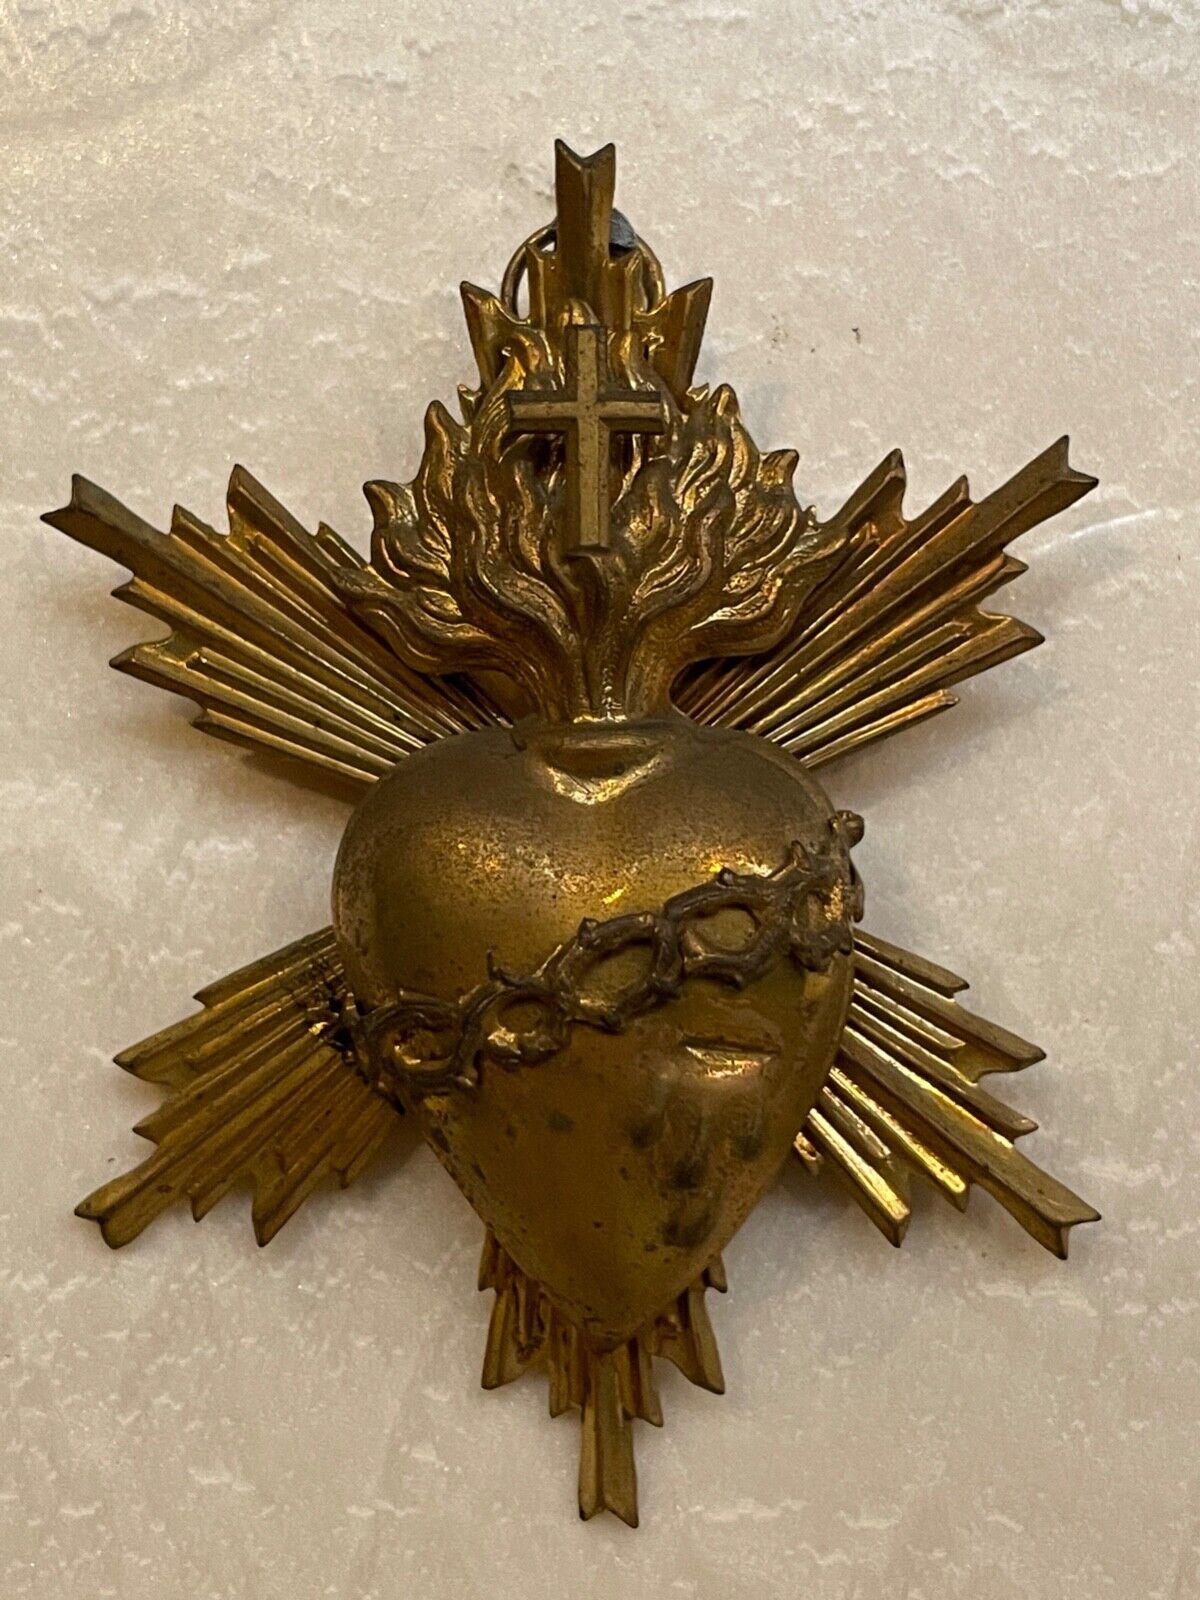 SALE ANTIQUE 19TH CENTURY GILDED BRASS FRENCH SACRED HEART EX VOTO 2.952 H